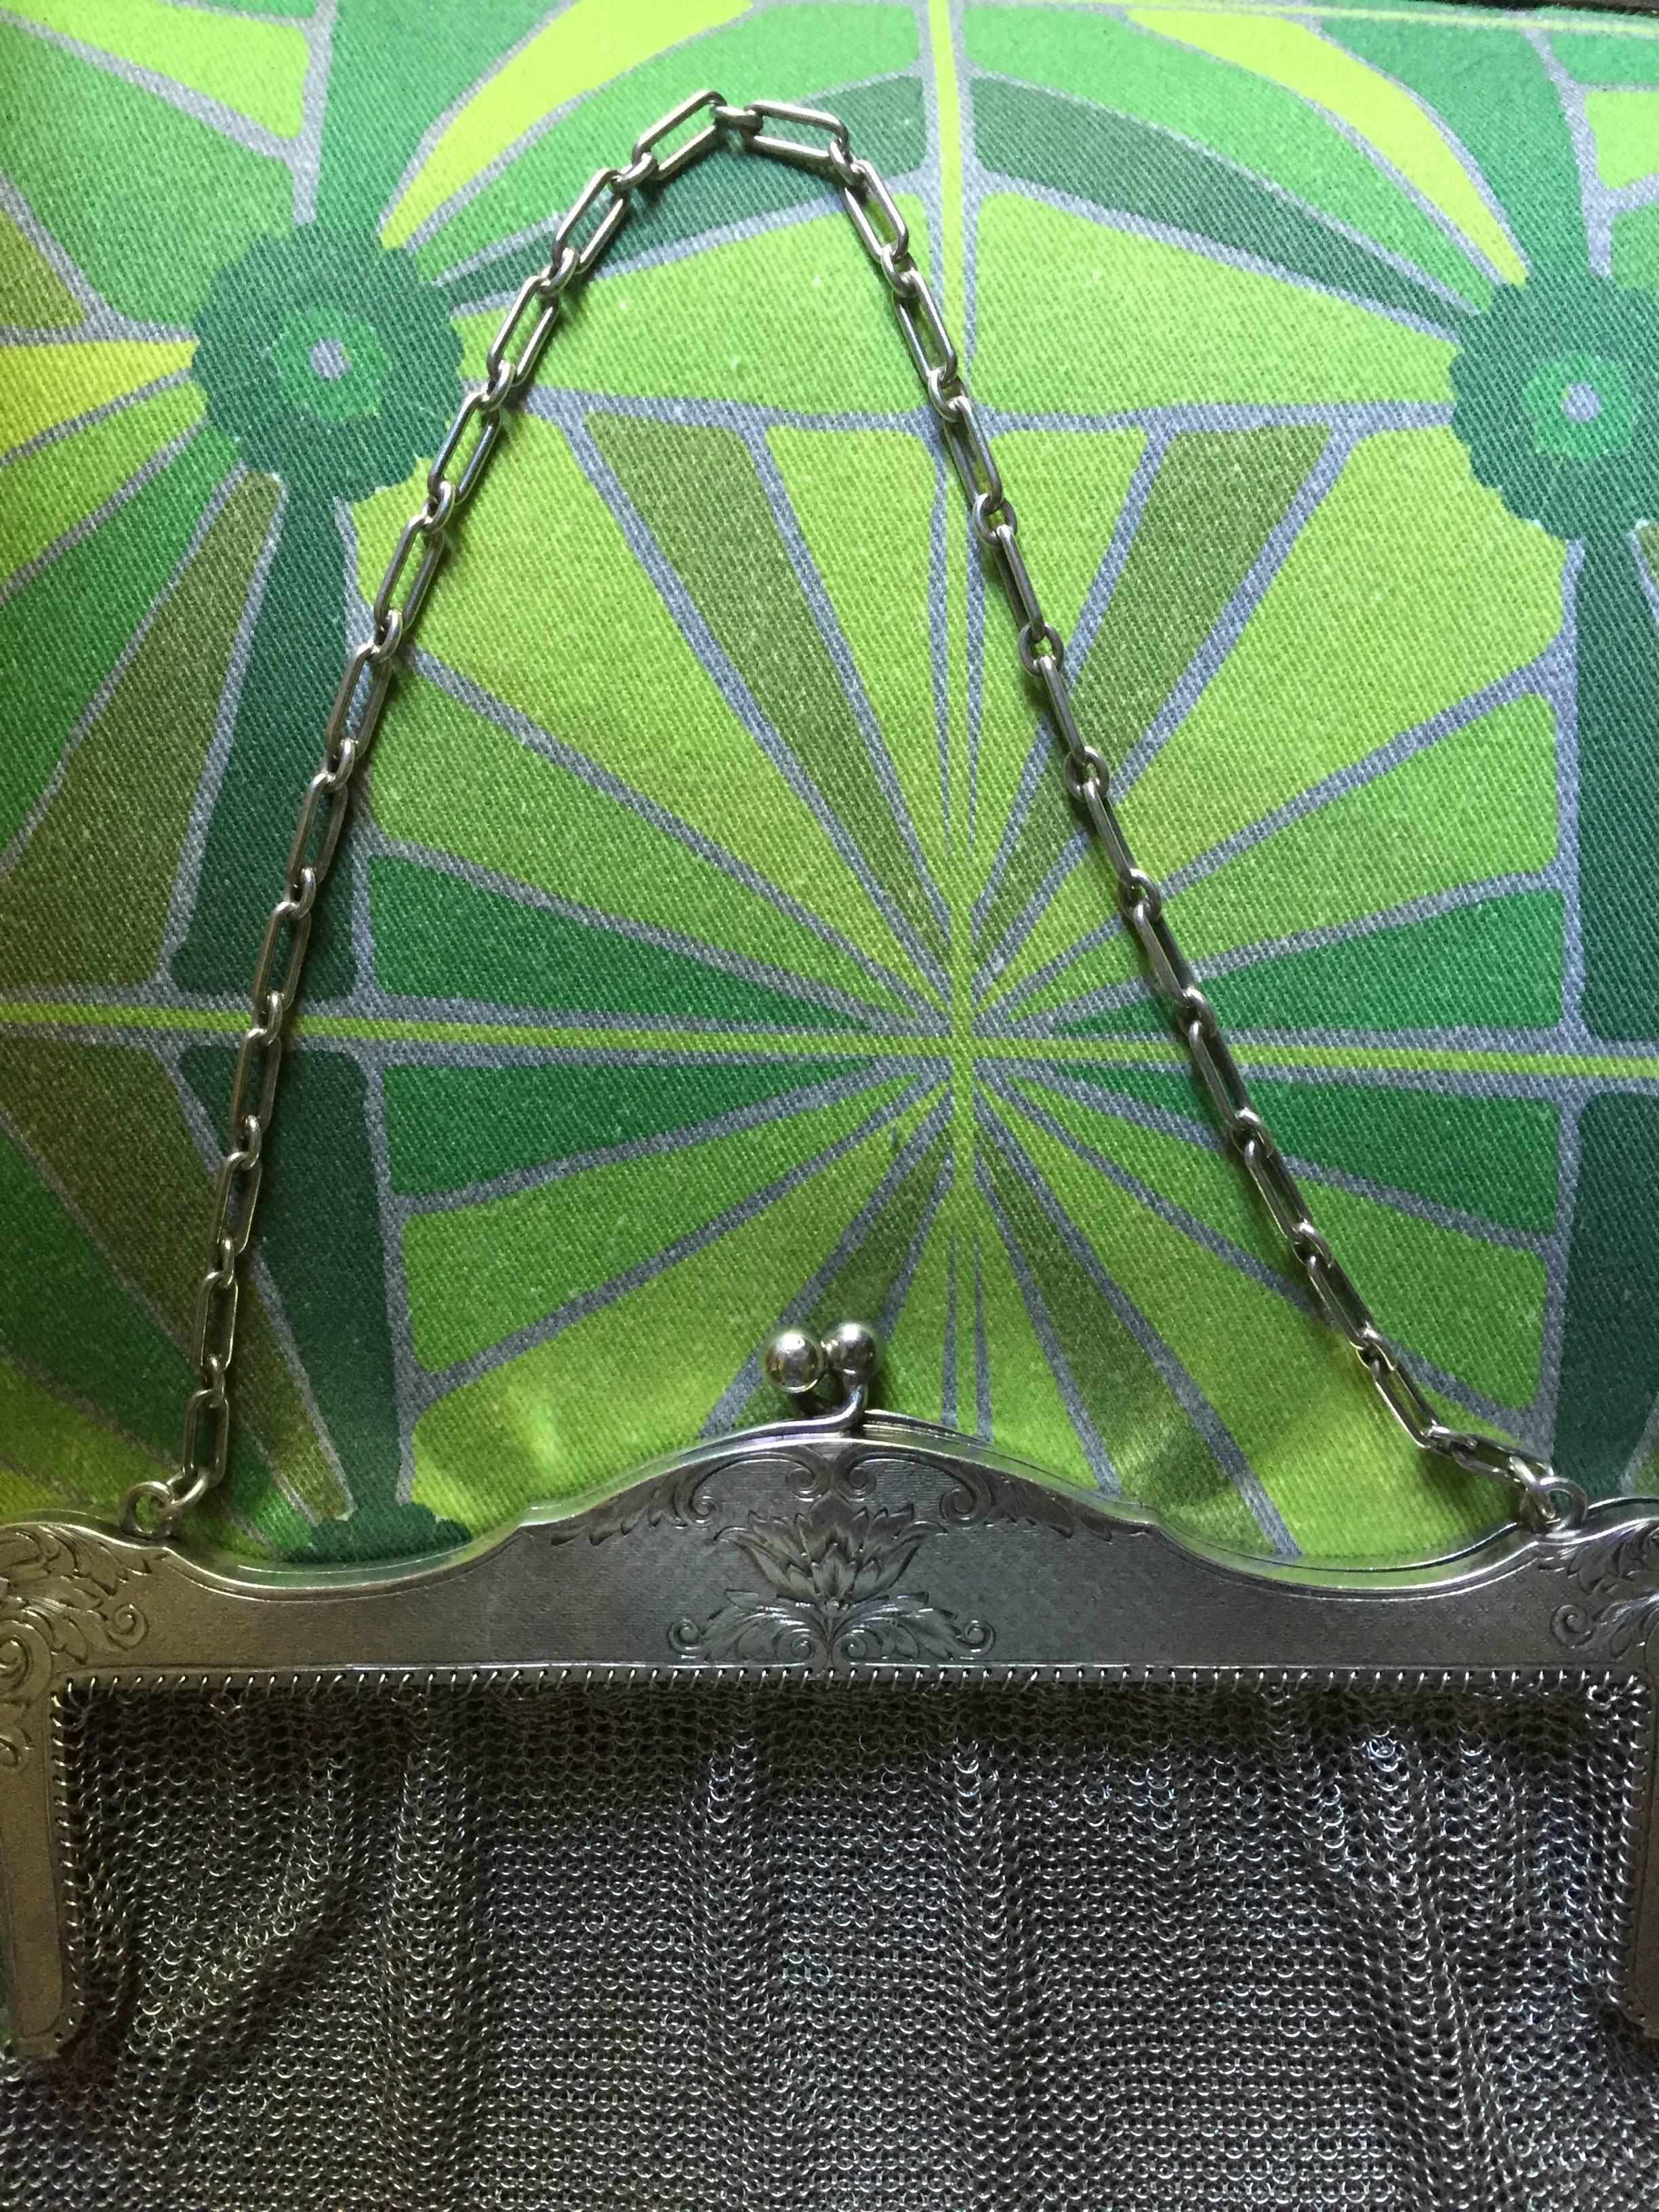 20th Century American Art Nouveau Sterling Silver and Steel Mesh Purse and Coin Purse For Sale